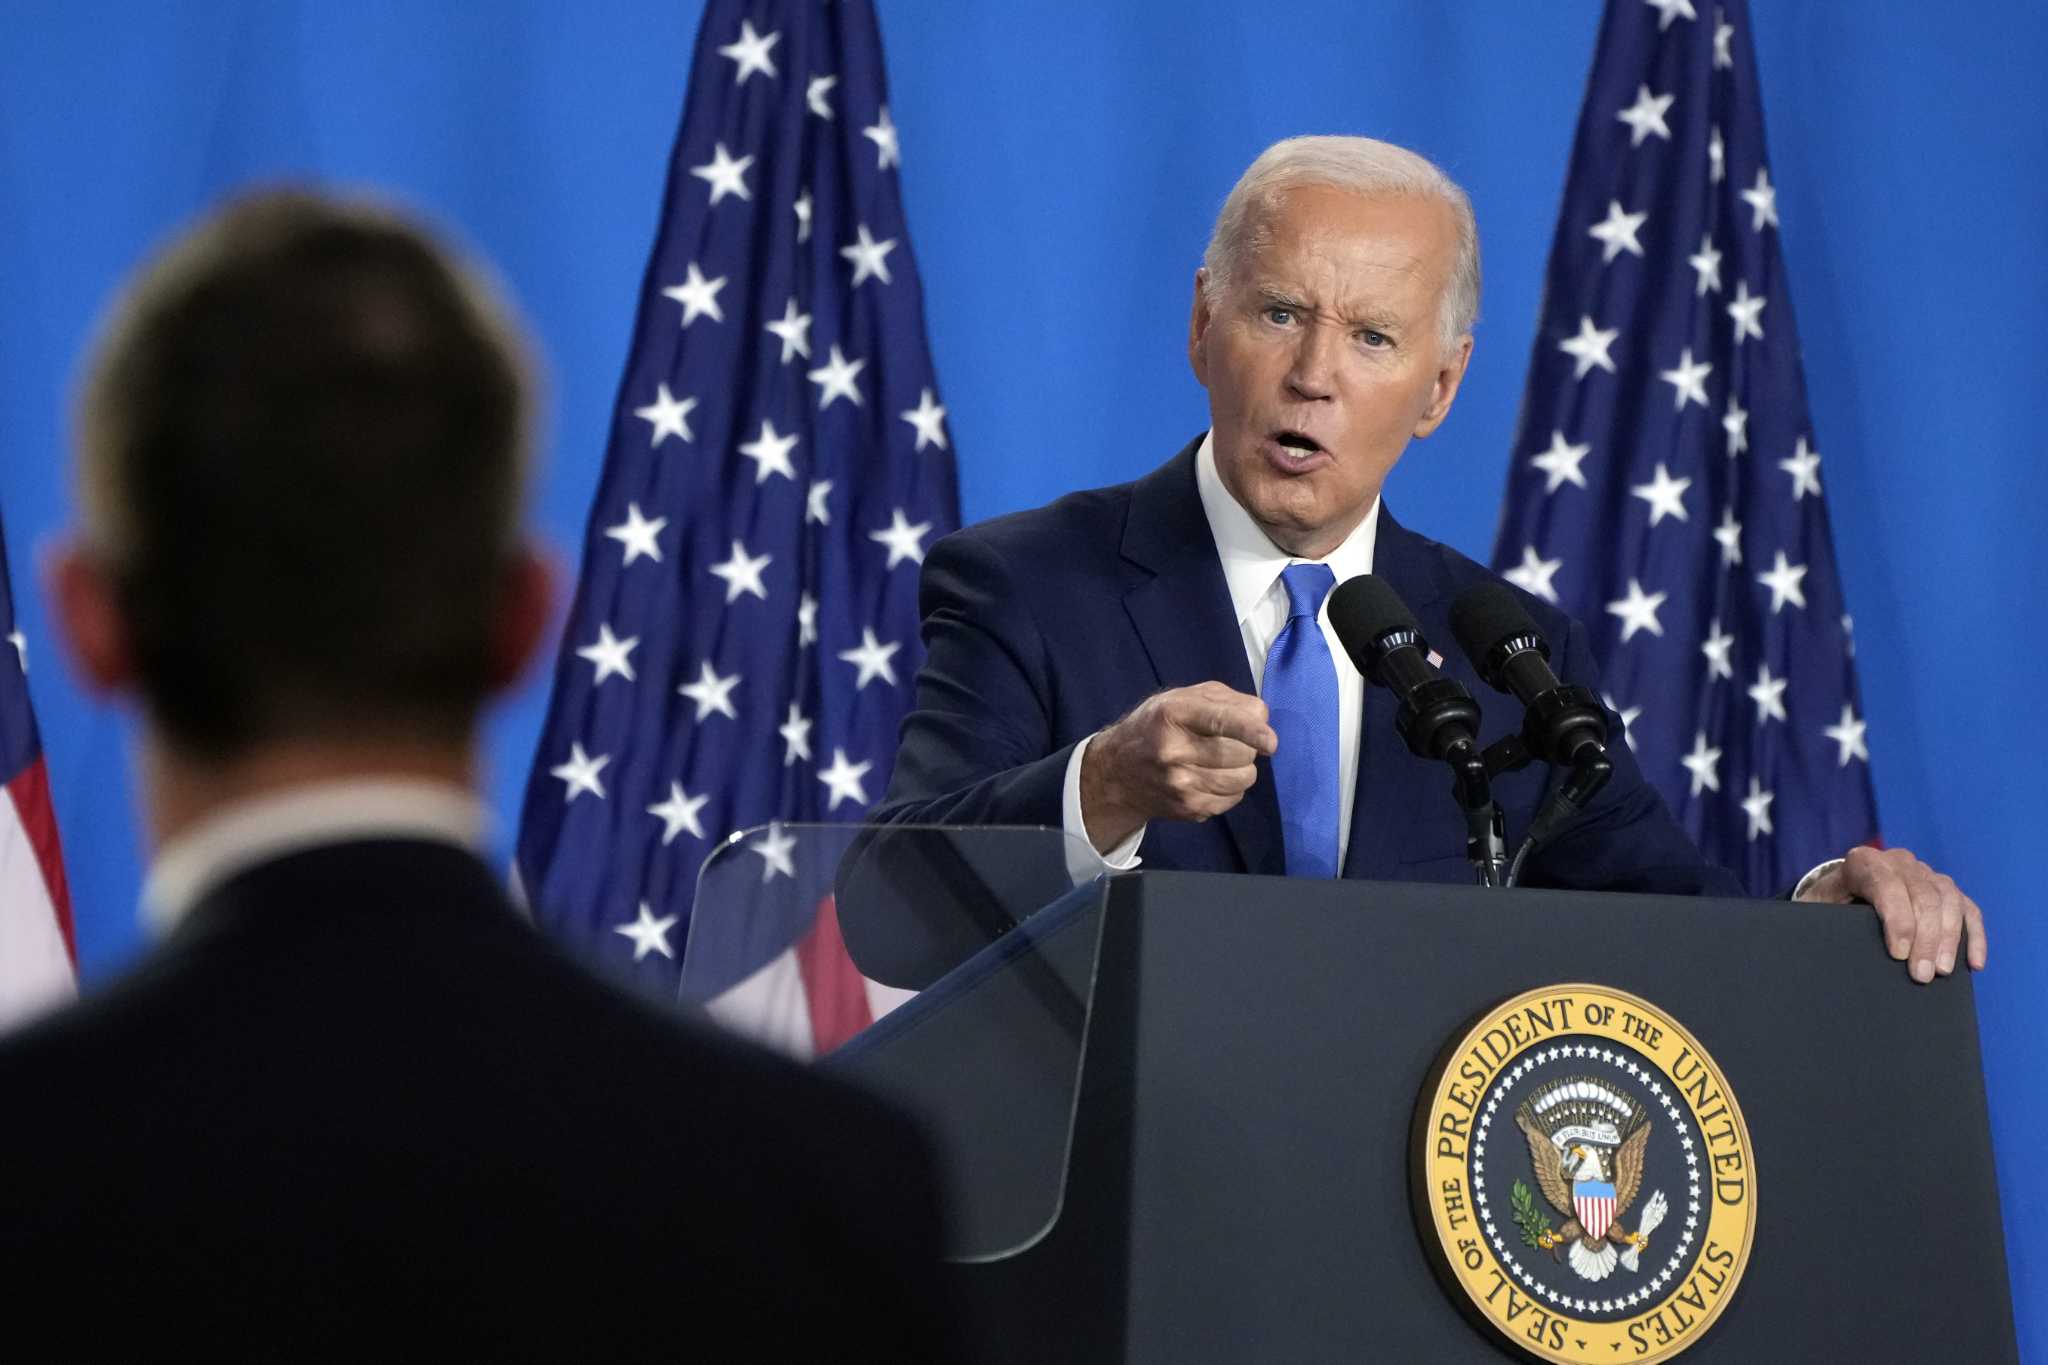 The Latest: Biden returns to the campaign trial following high-stakes news conference